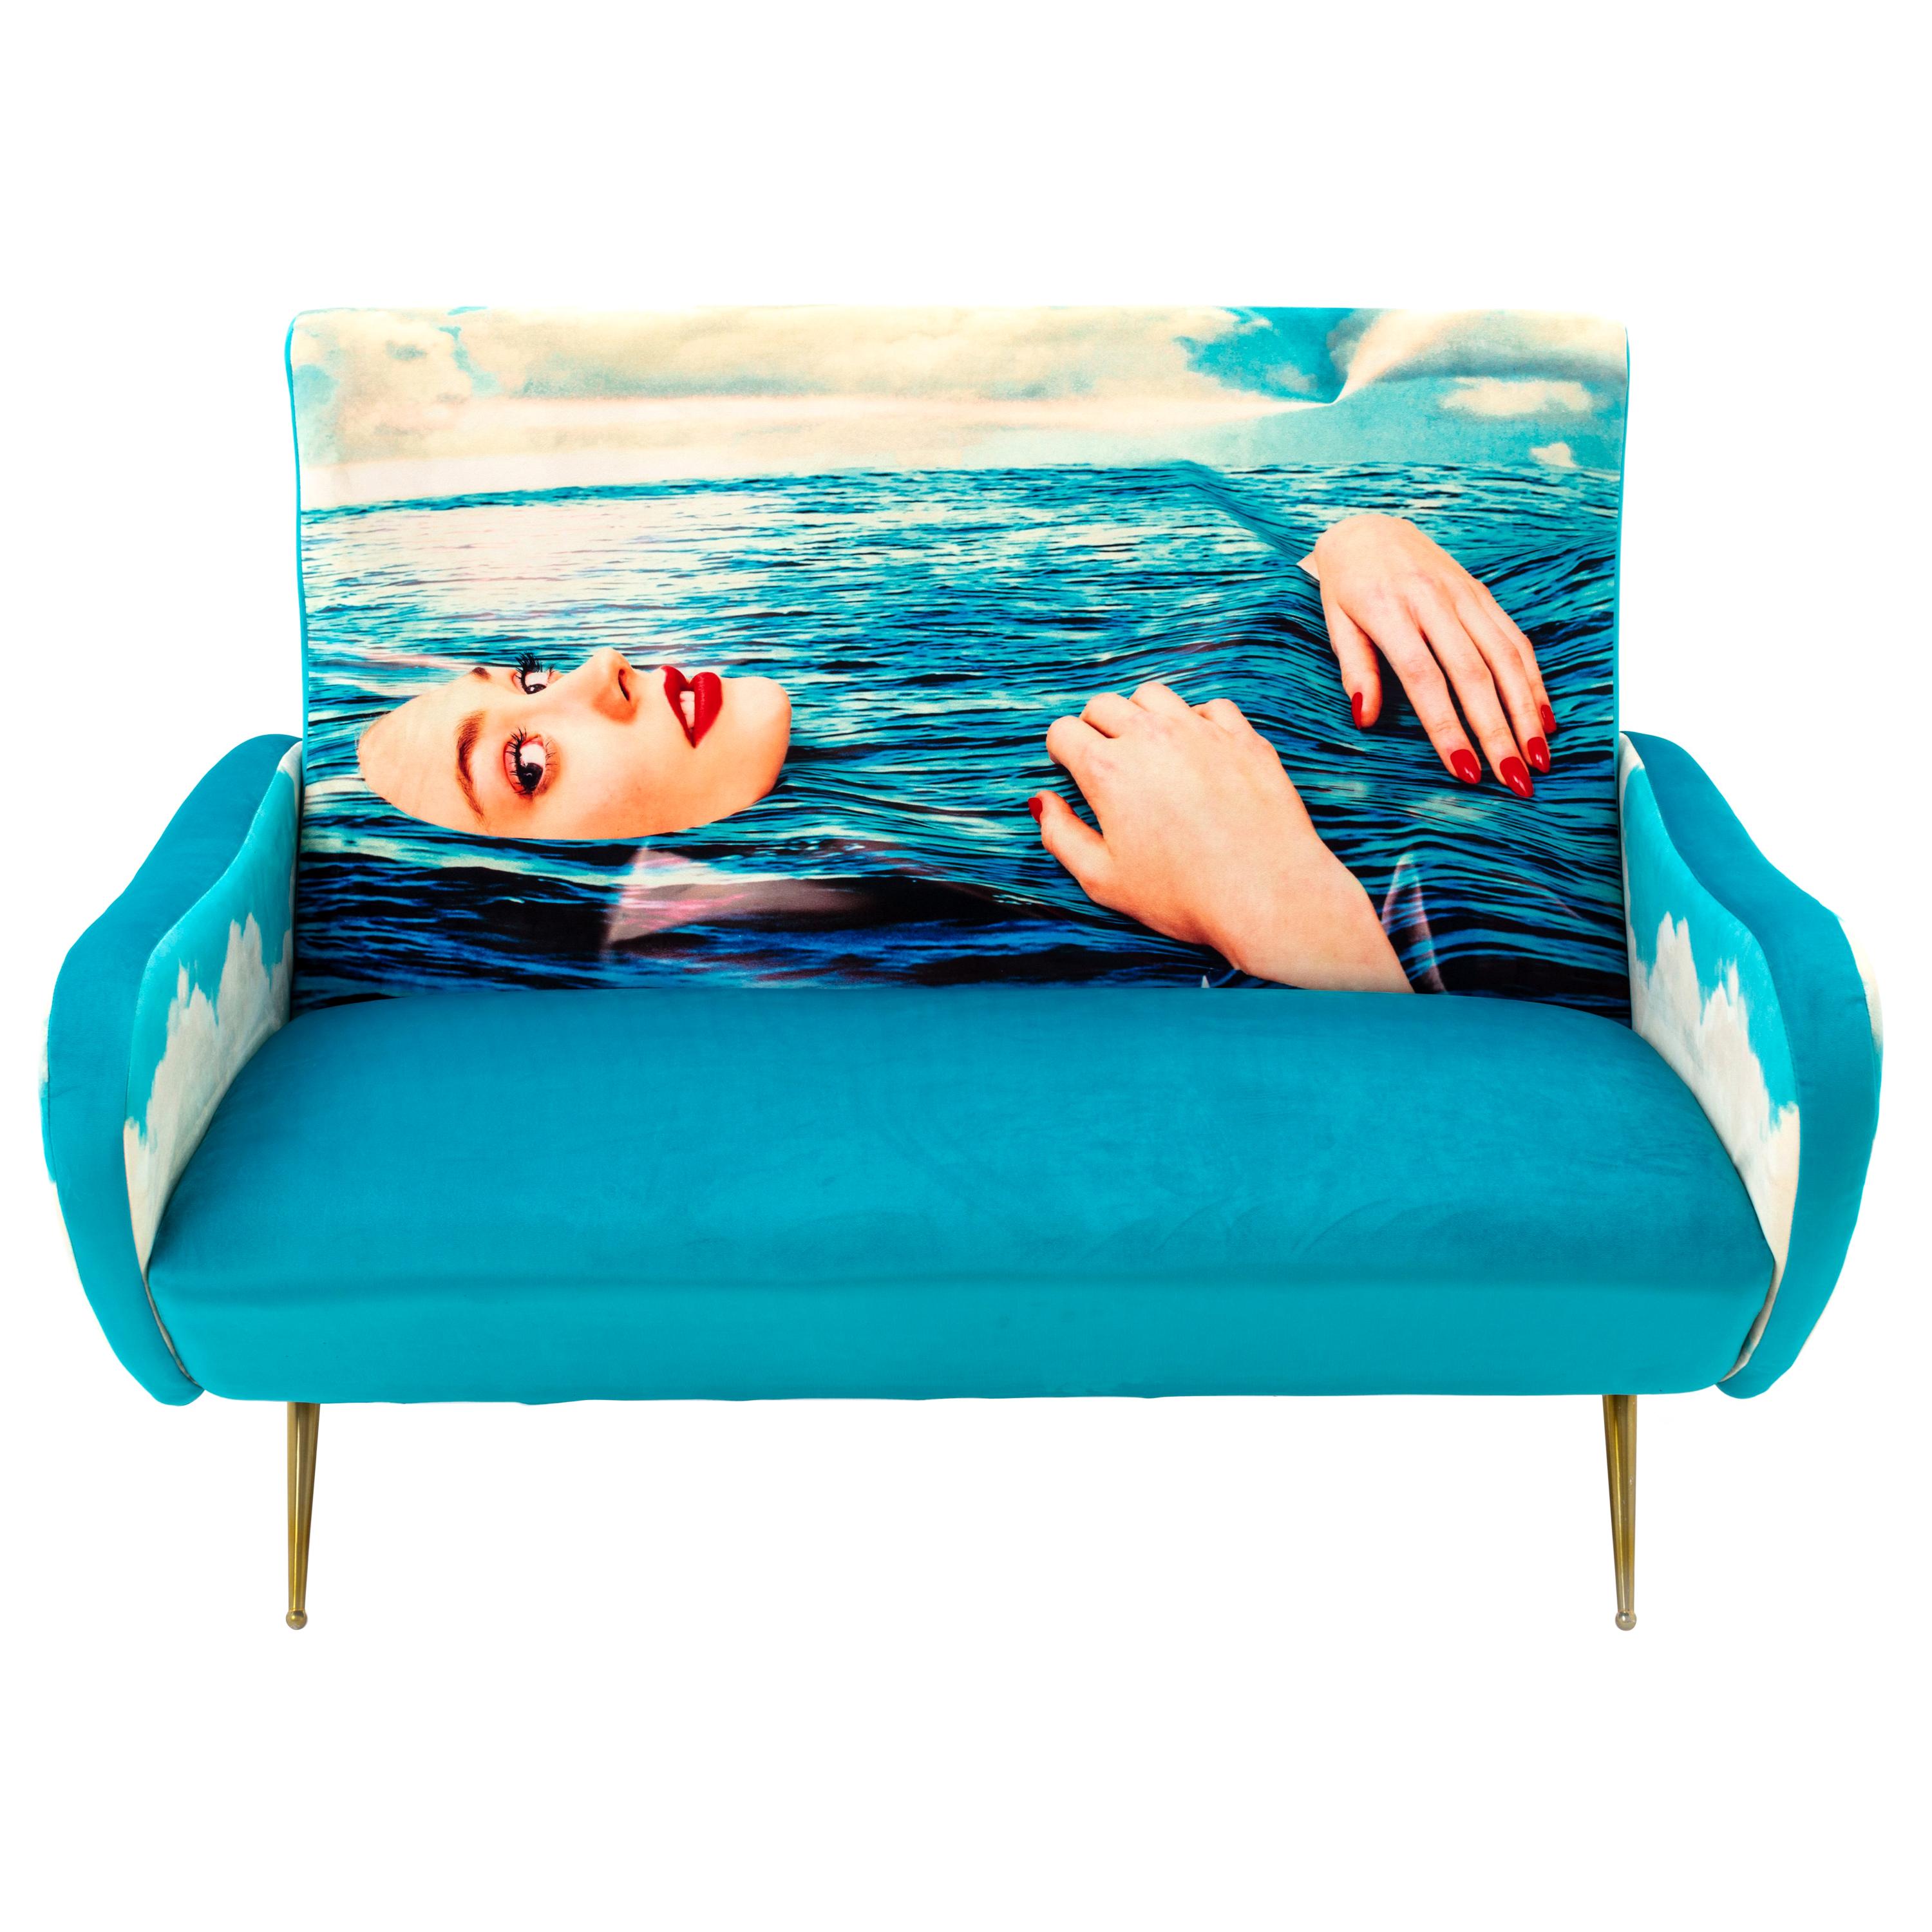 Seletti "Sea Girl" Upholstered Two-Seat Sofa by Toiletpaper For Sale